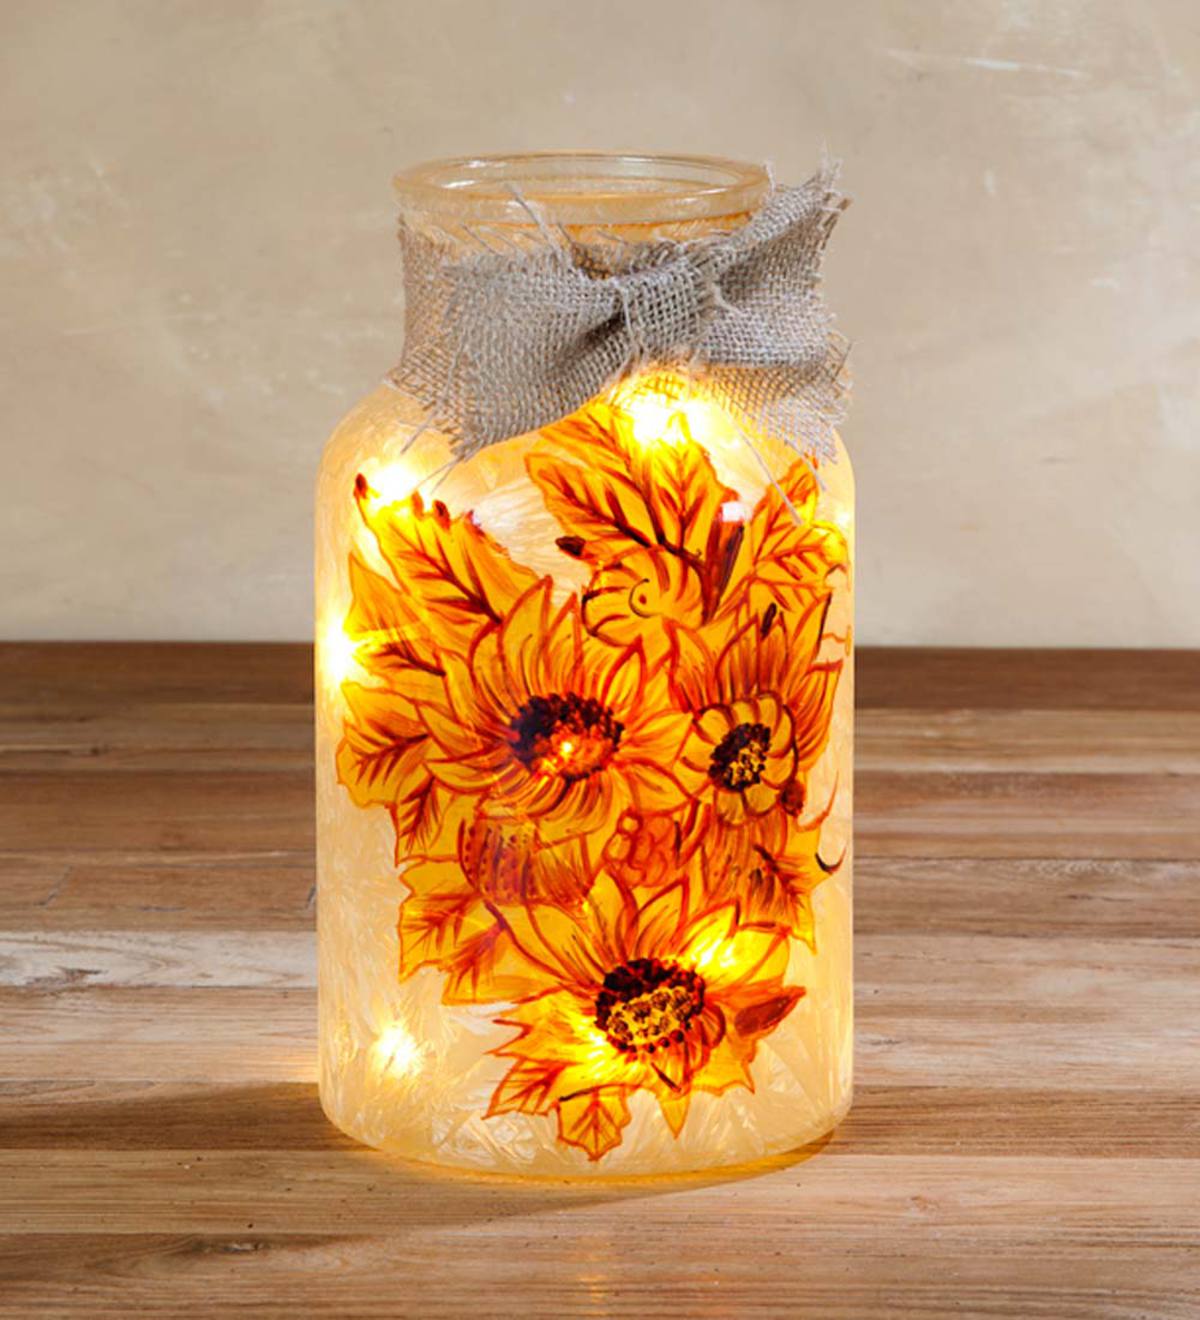 Lighted Jar with Painted Fall Scene - Leaves | Plow & Hearth